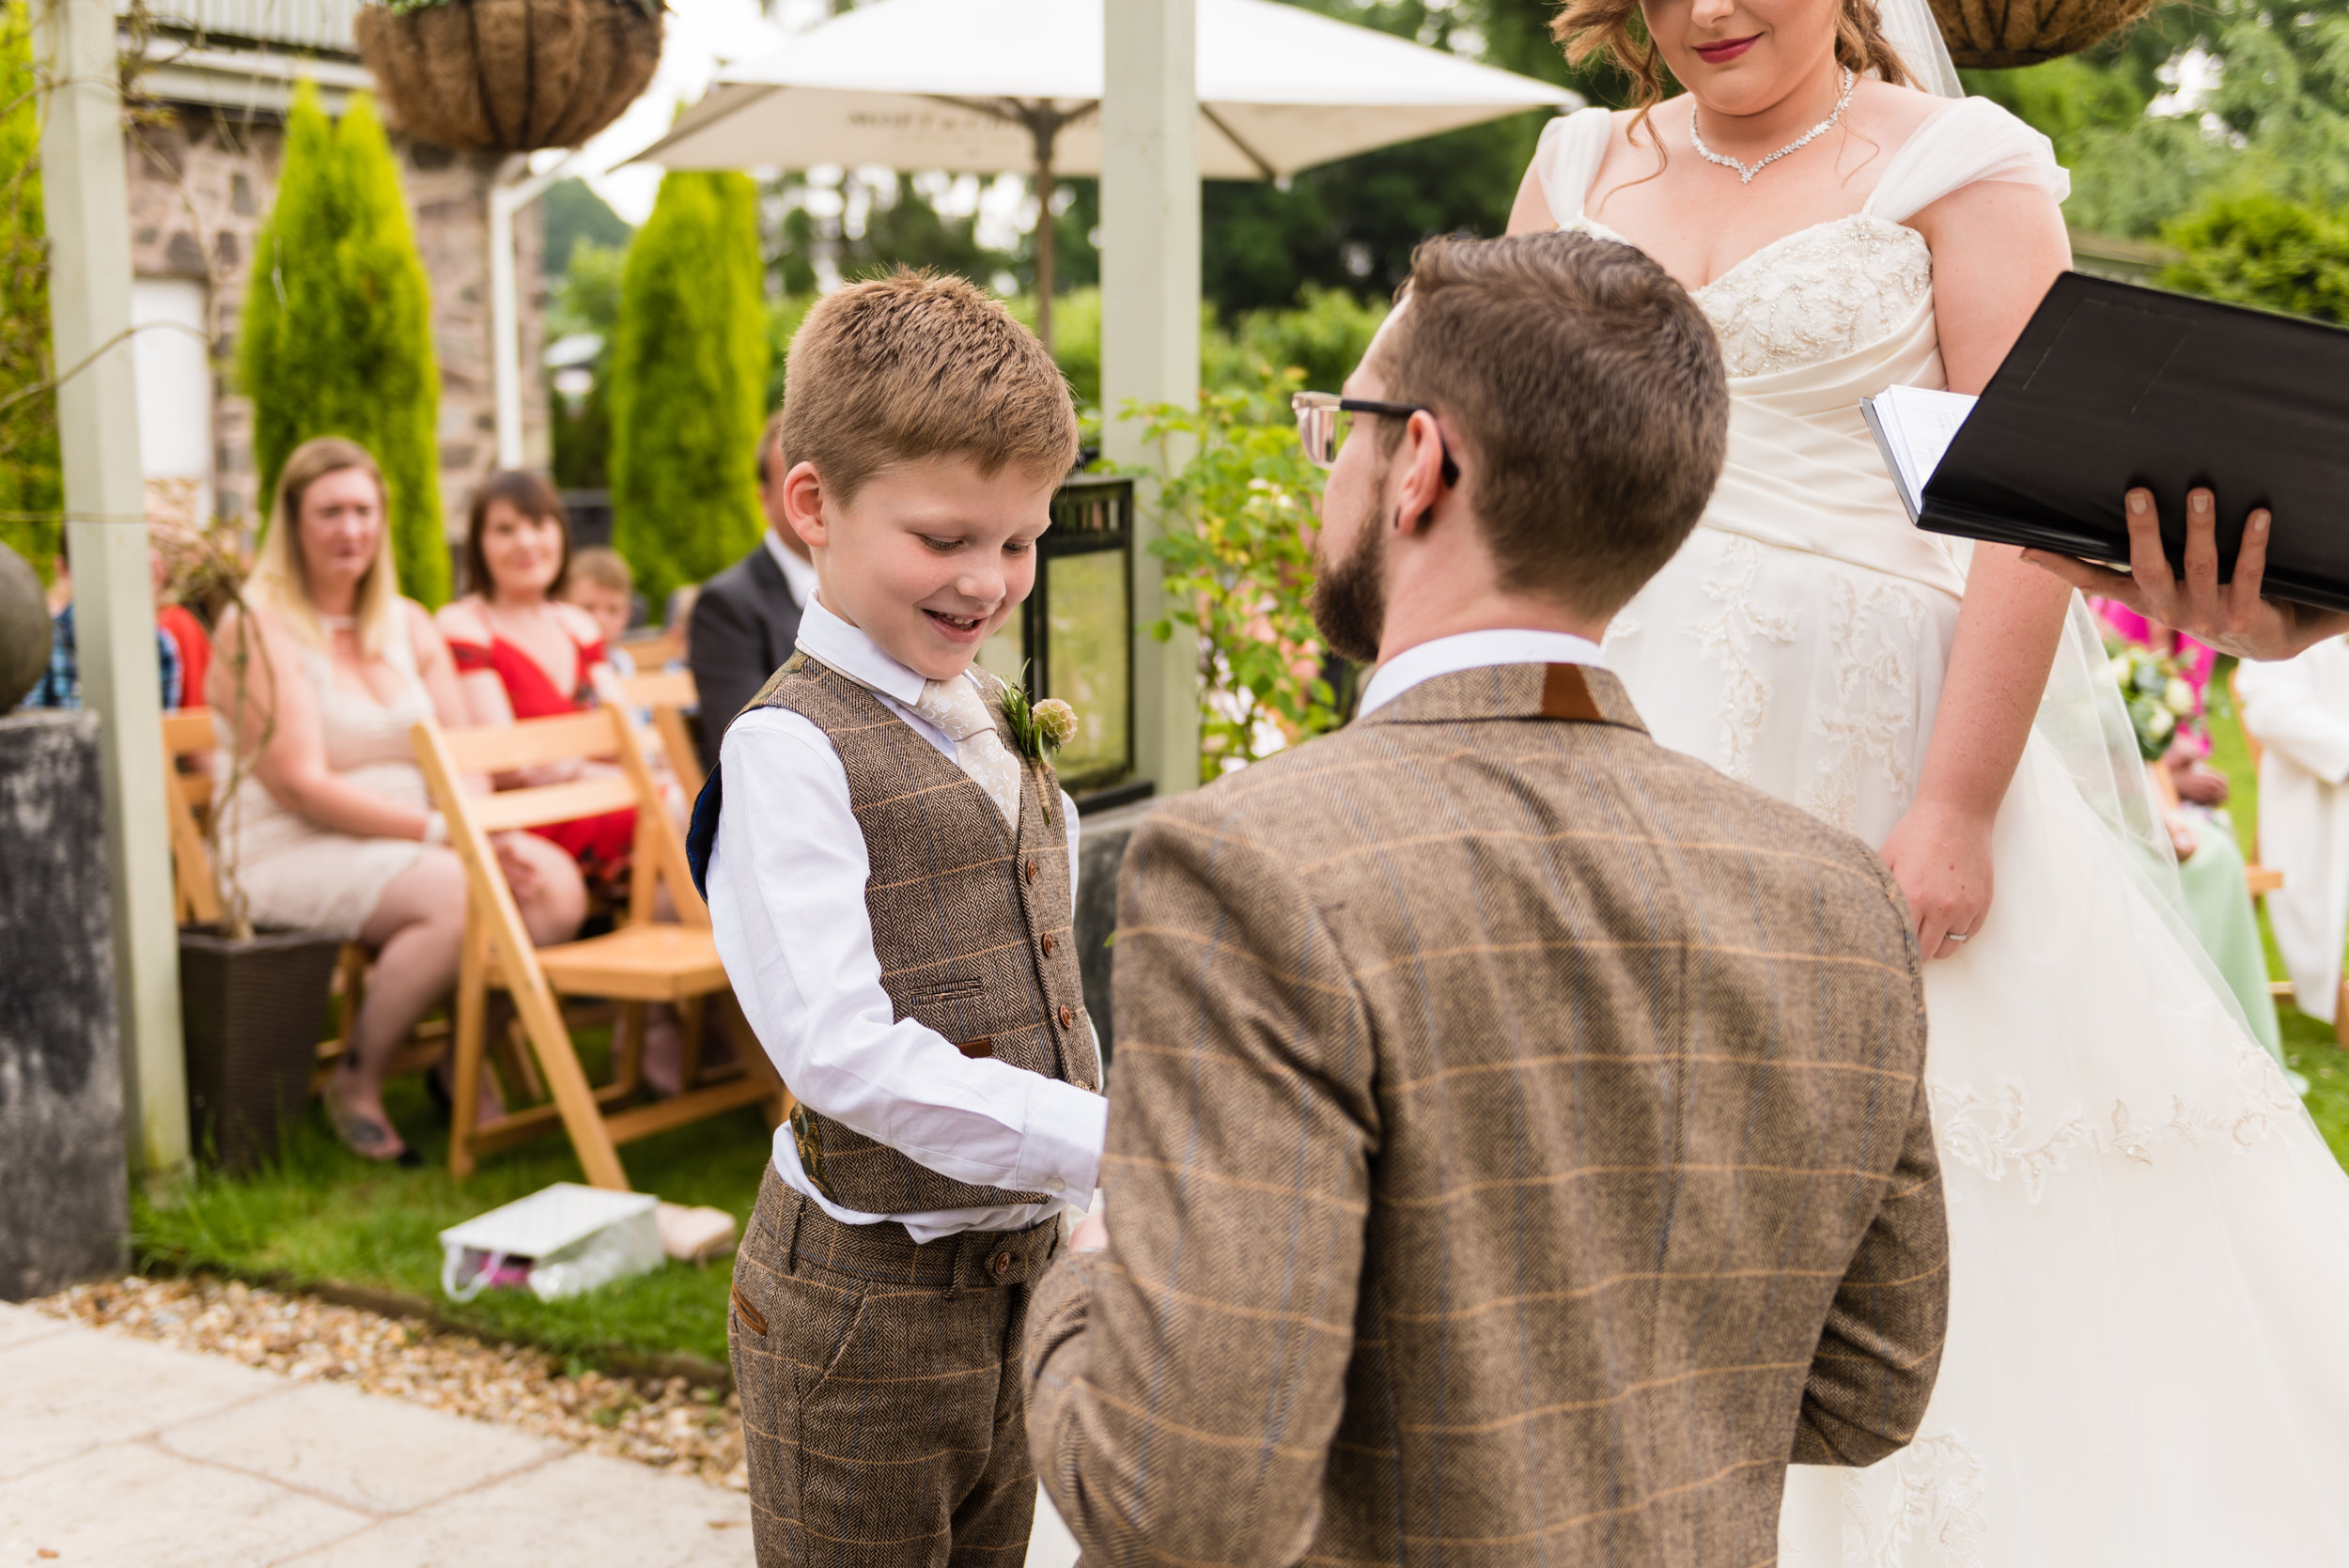 Doting Stepfather's emotional vows to stepson